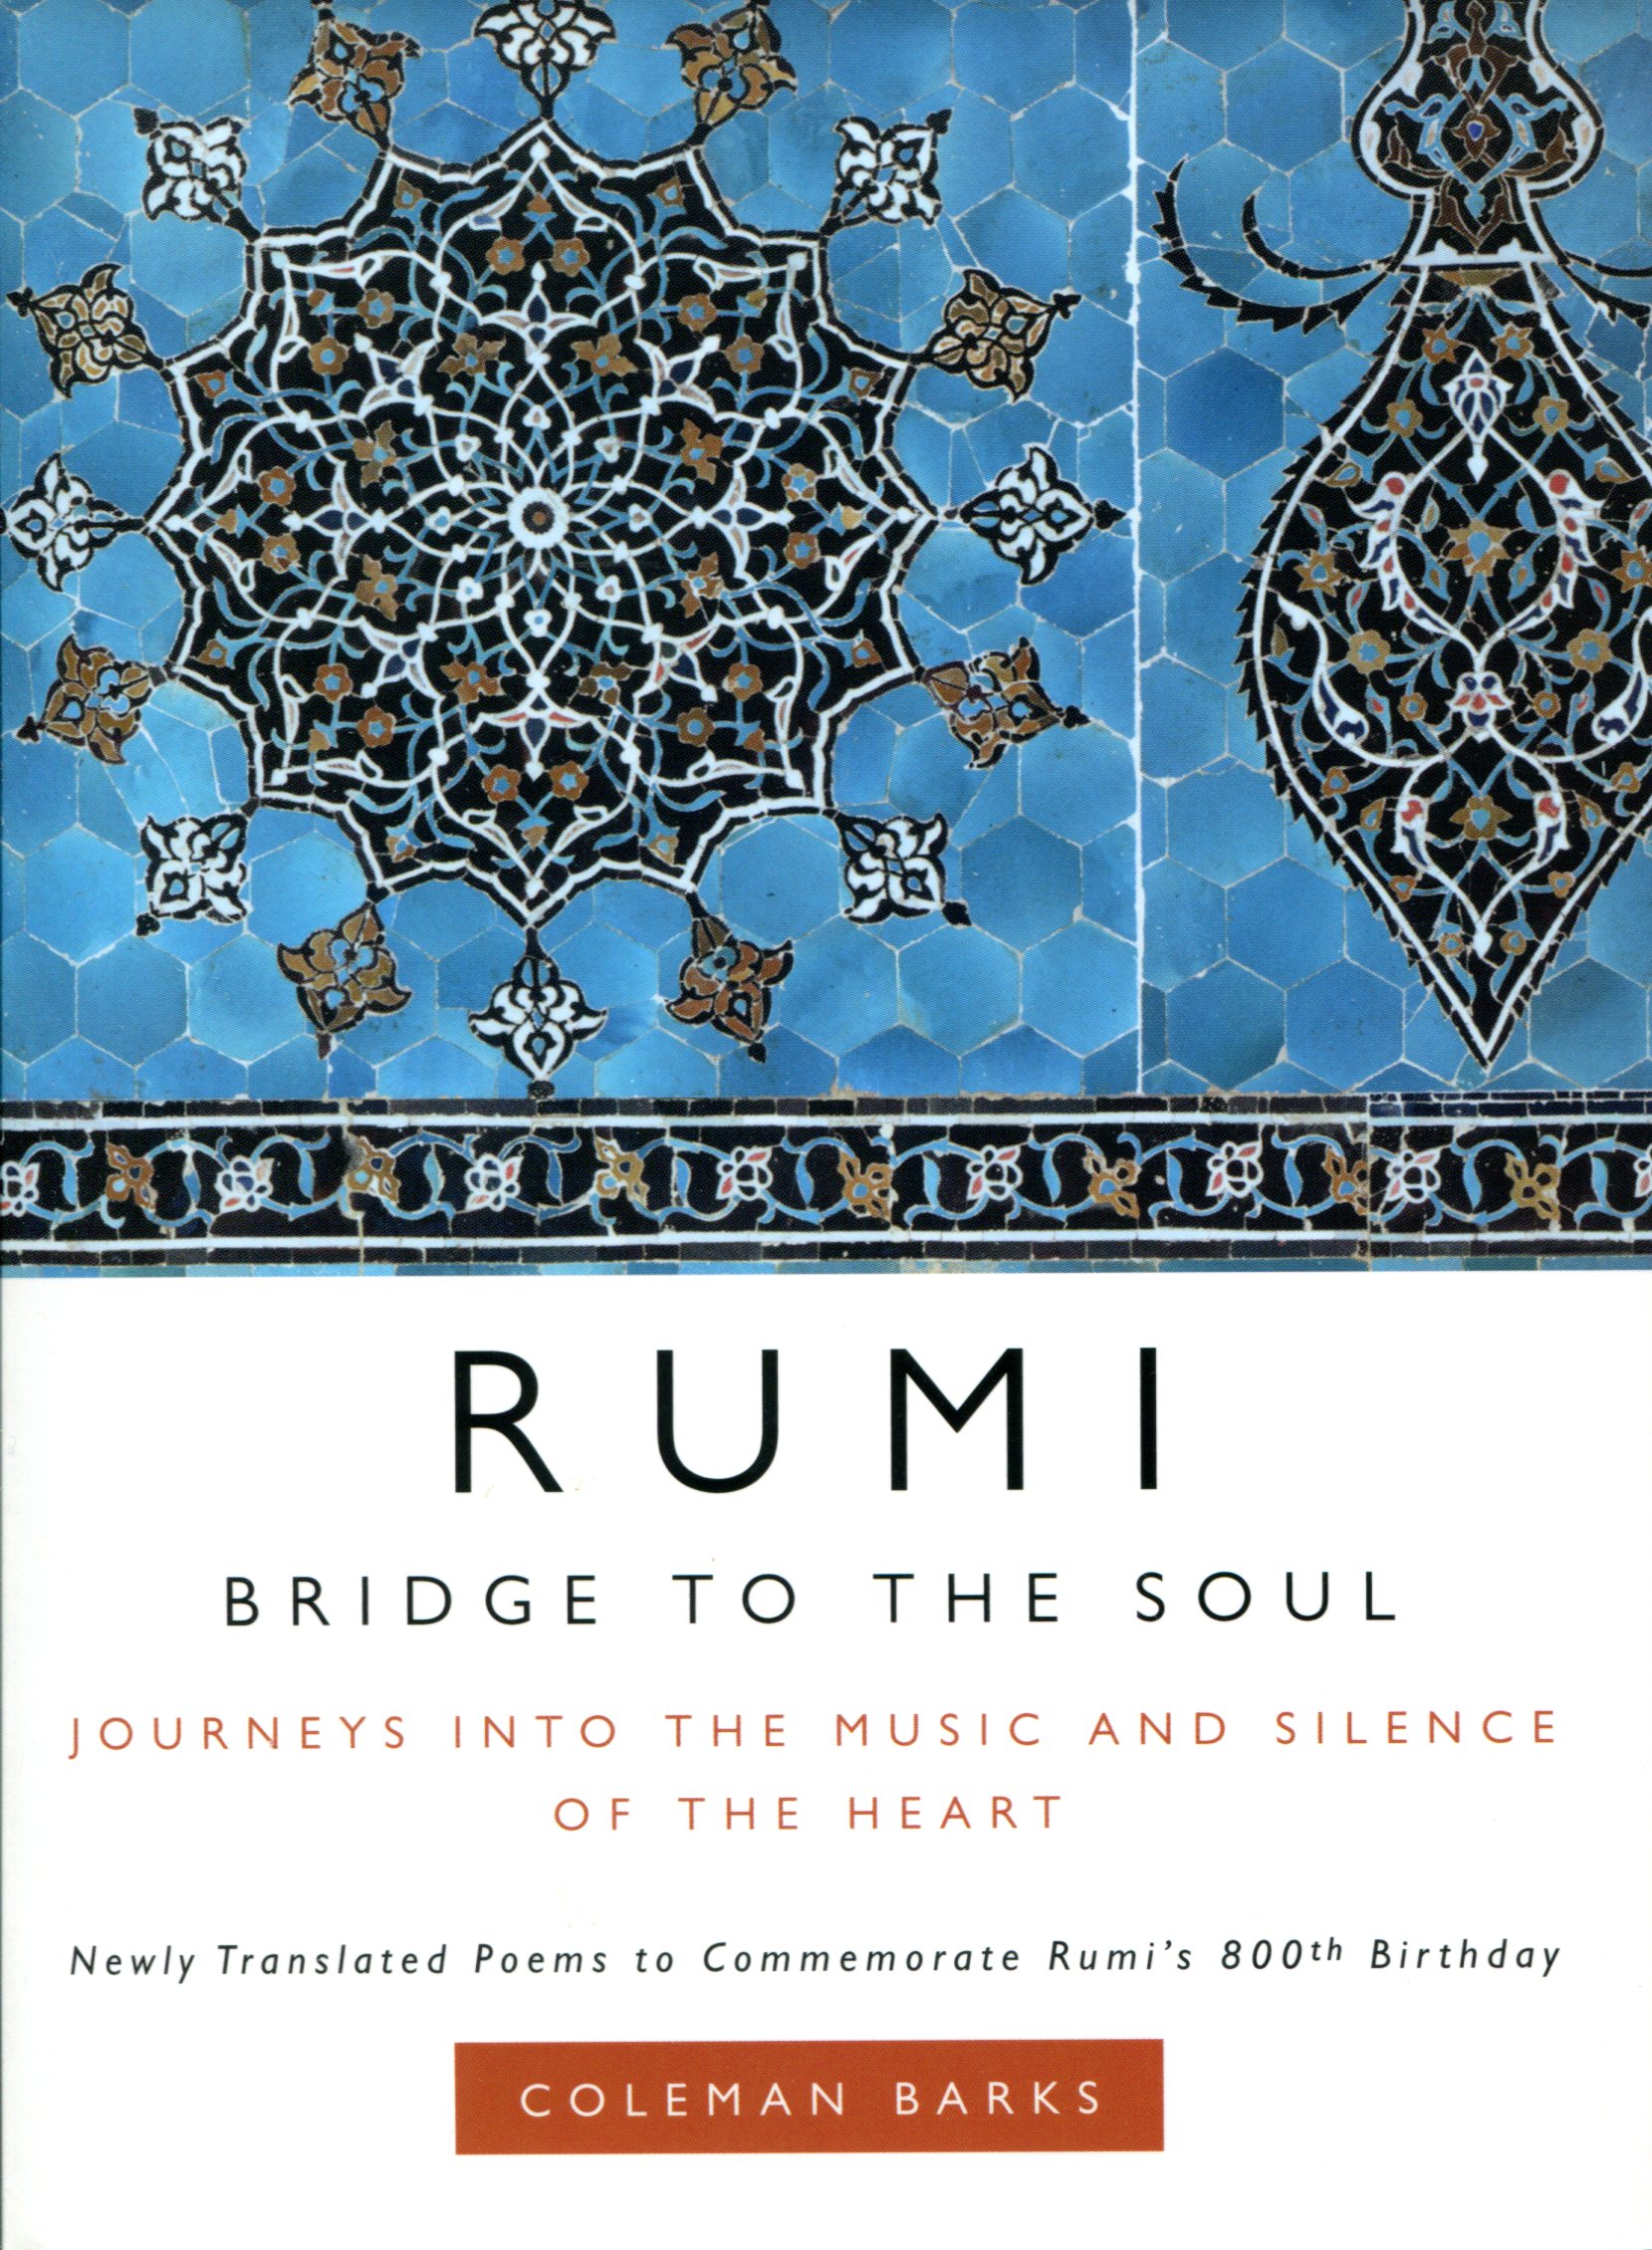 Rumi Bridge to the Soul by Coleman Barks